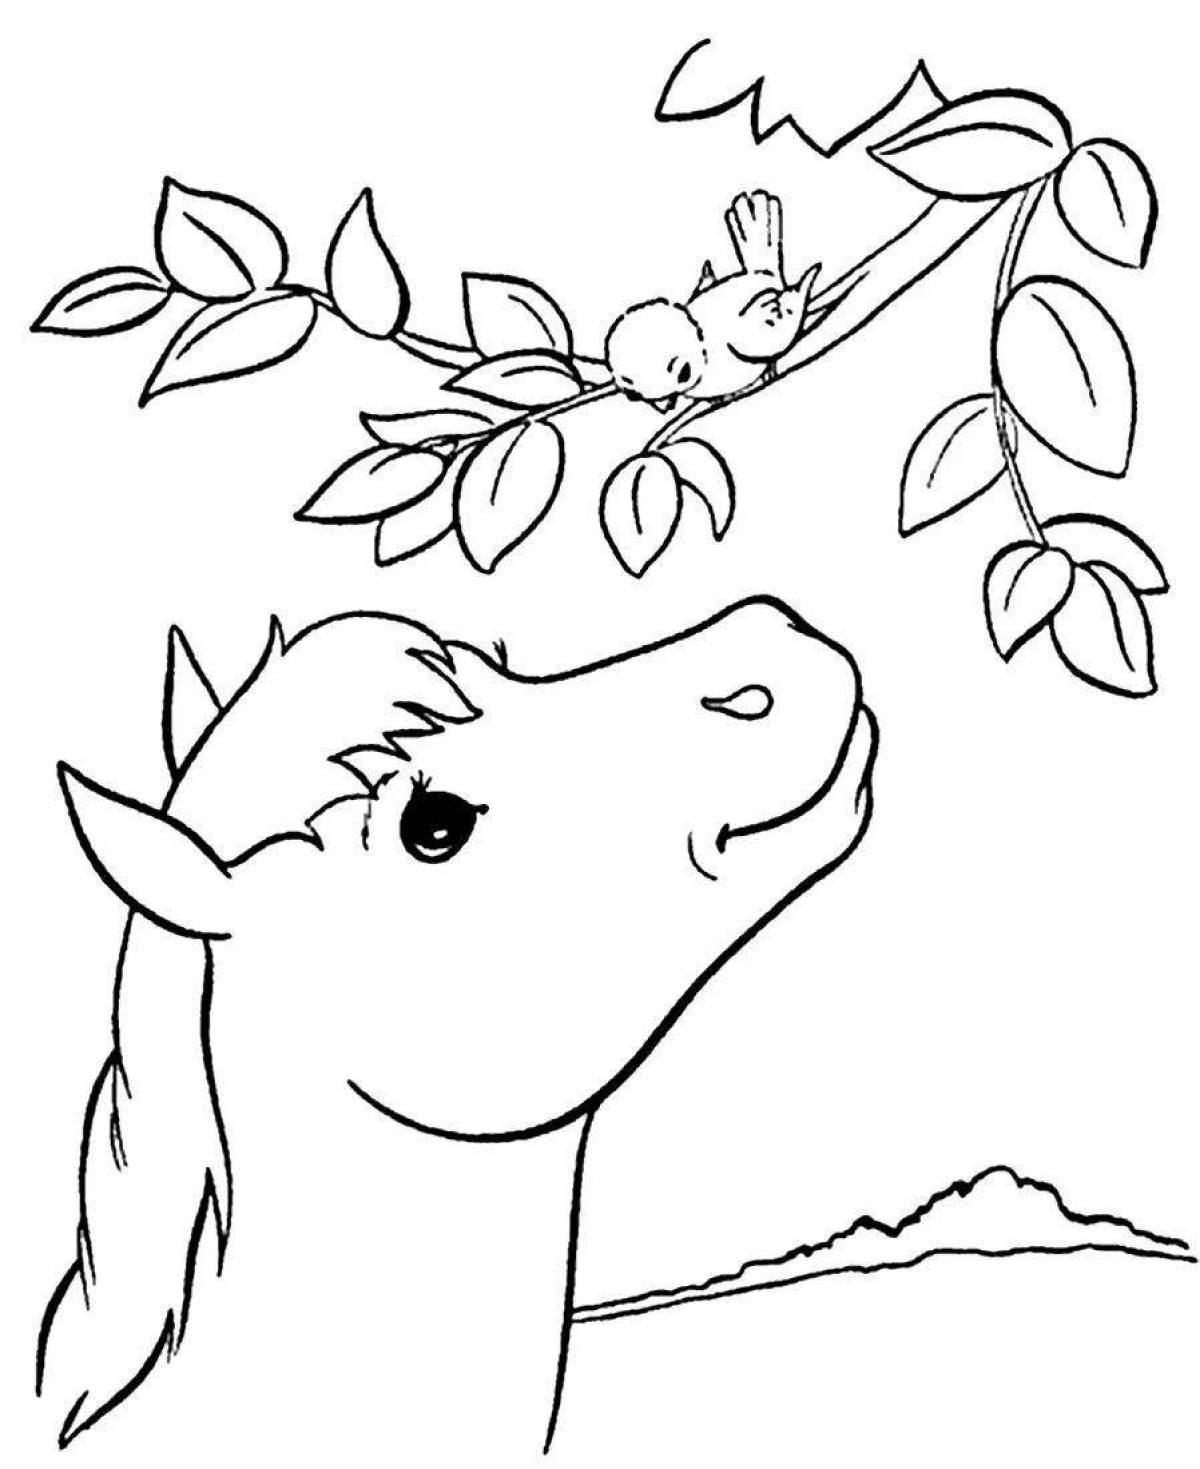 Coloring page serendipitous beautiful animals